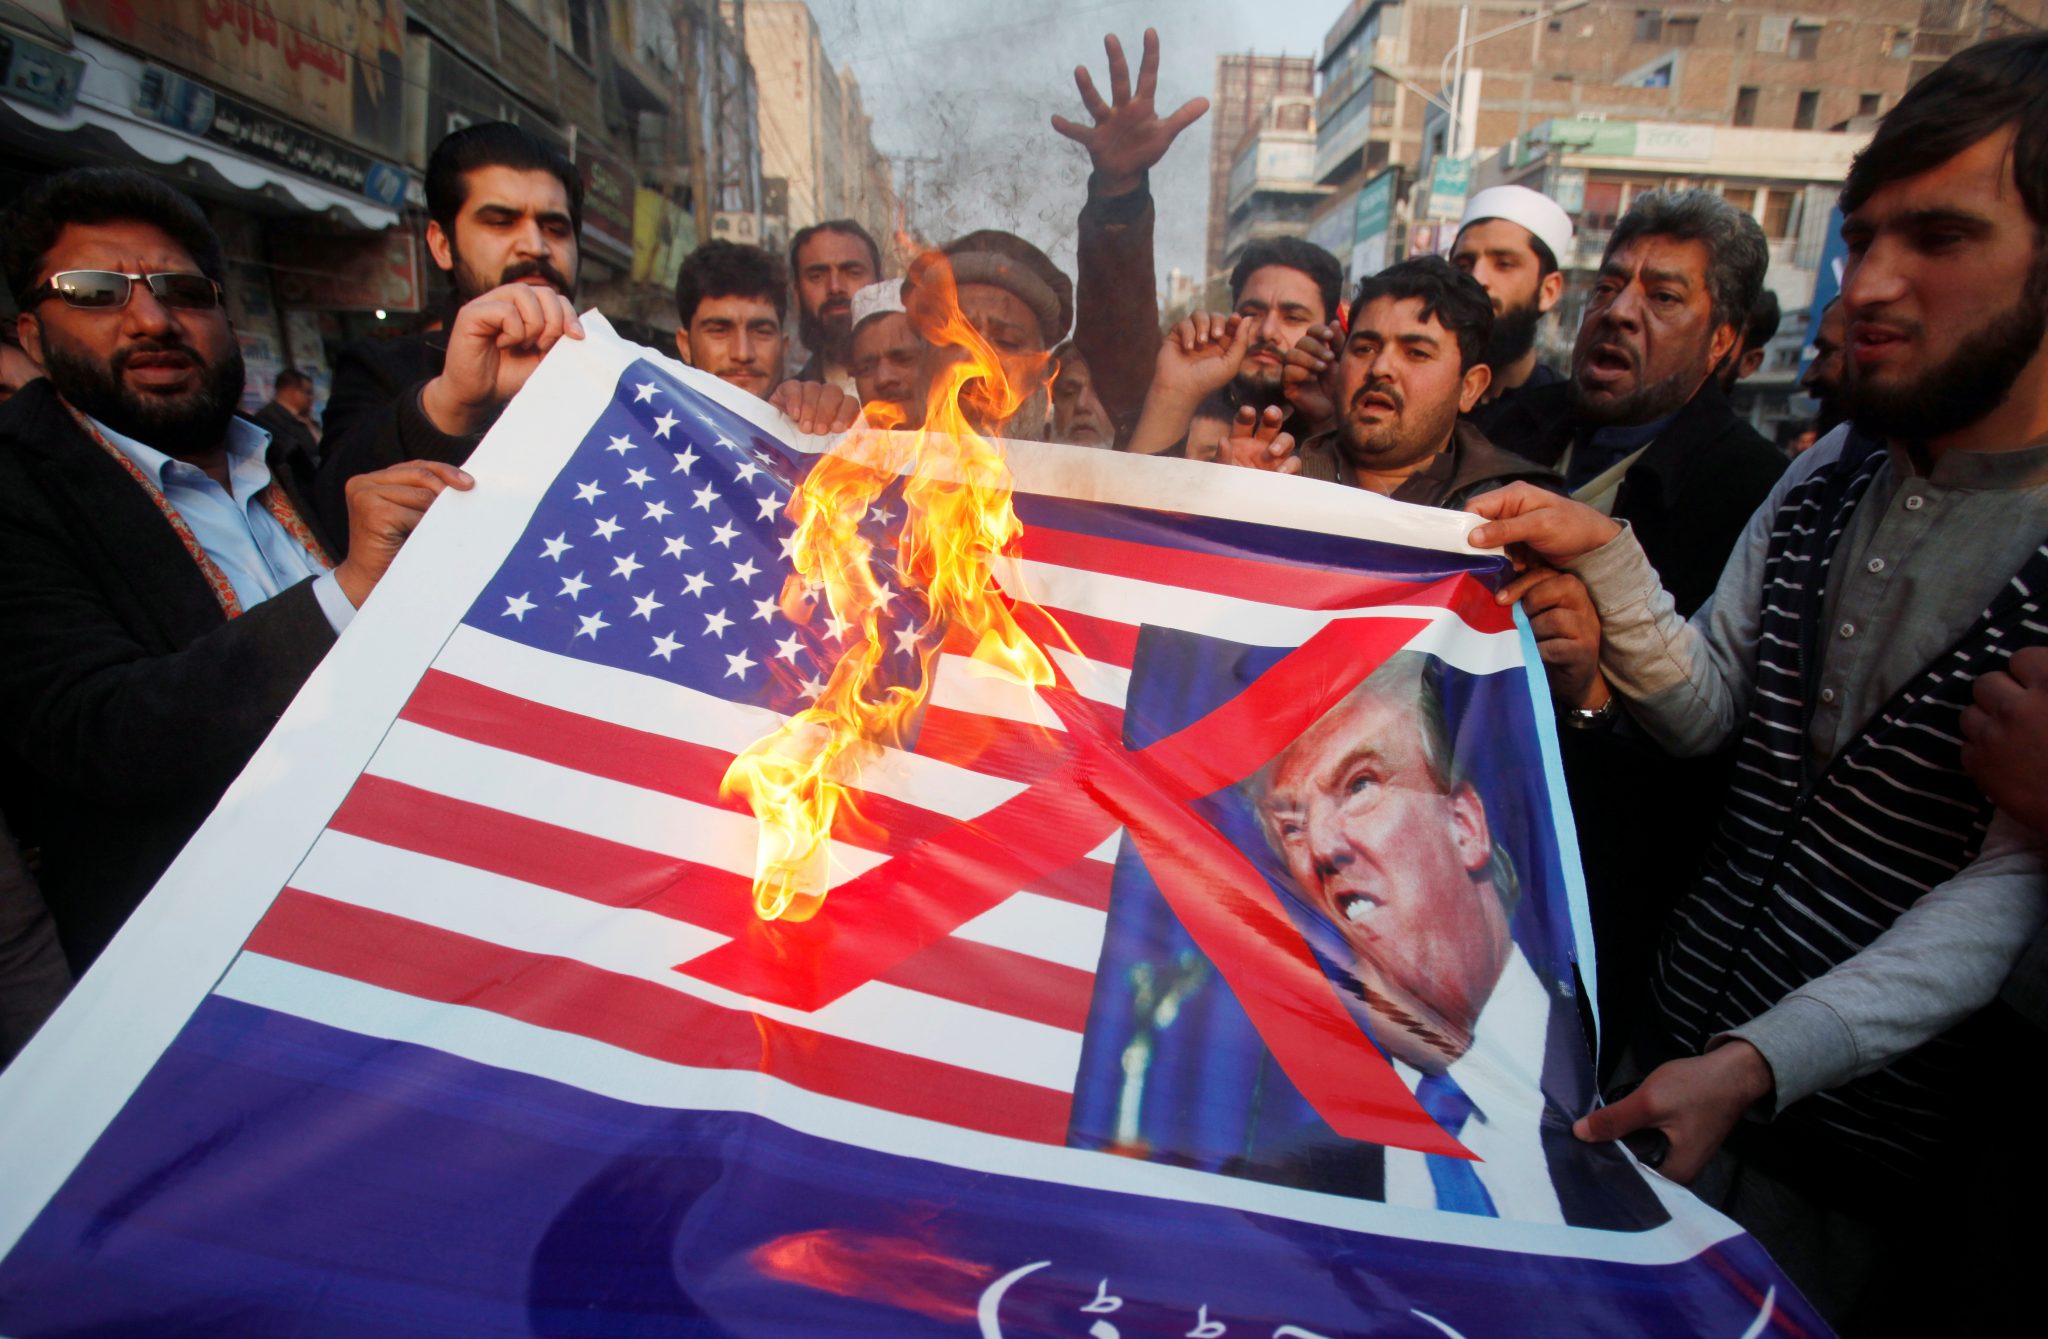 US announces the suspension of financial aid to Pakistan: People burn a sign depicting a U.S. flag and a picture of U.S. President Trump as they take part in an anti-U.S. rally in Peshawar | REUTERS